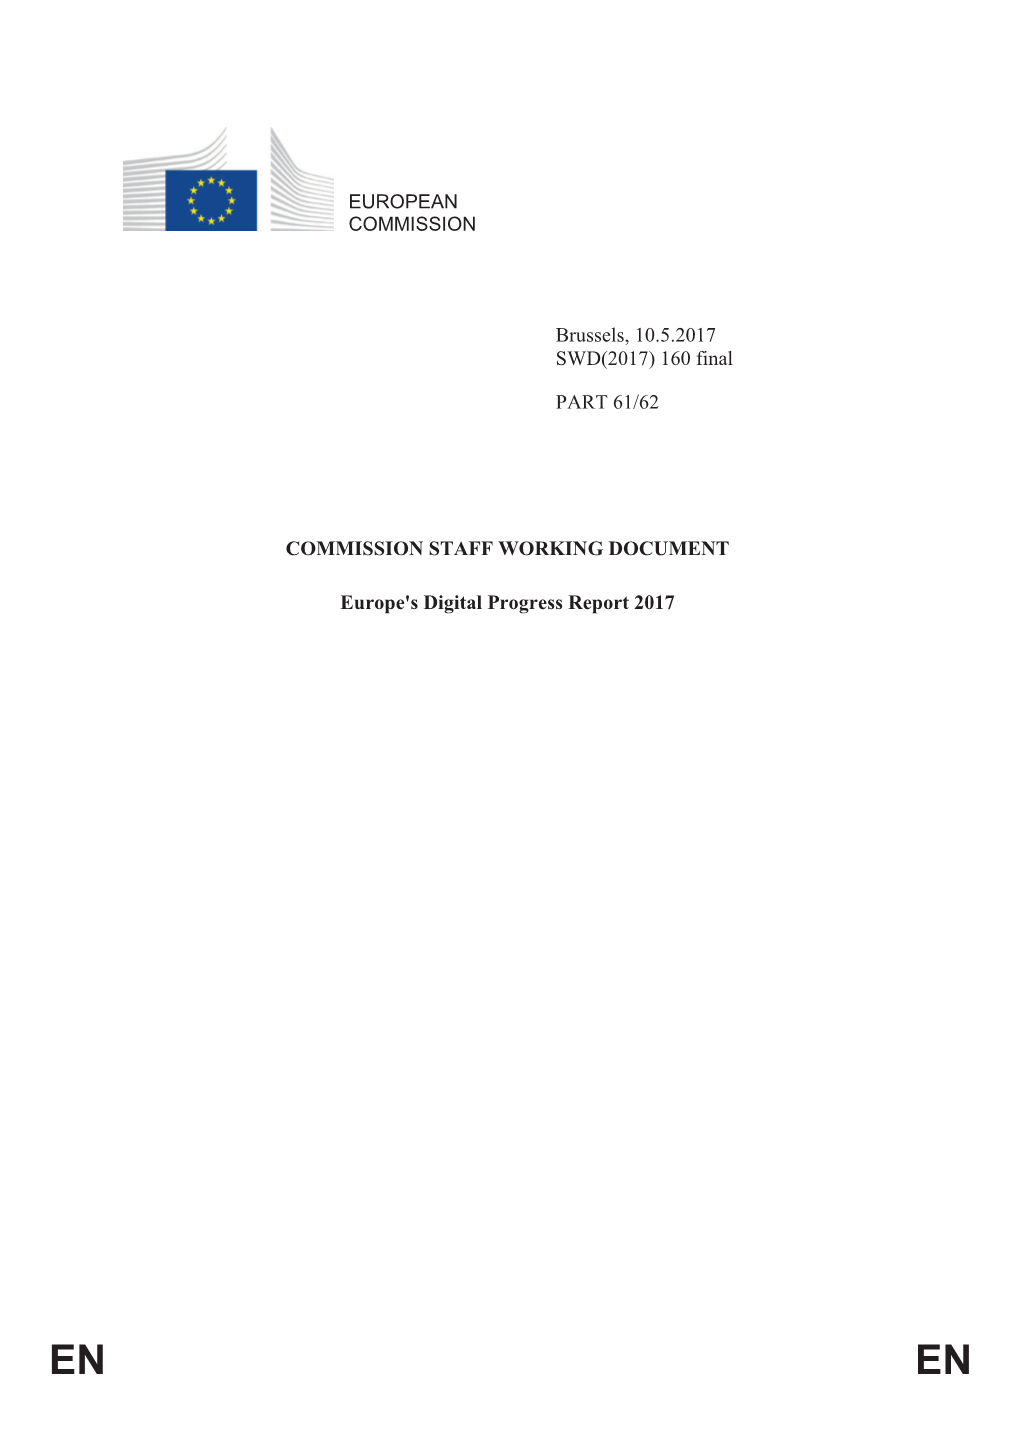 EUROPEAN COMMISSION Brussels, 10.5.2017 SWD(2017) 160